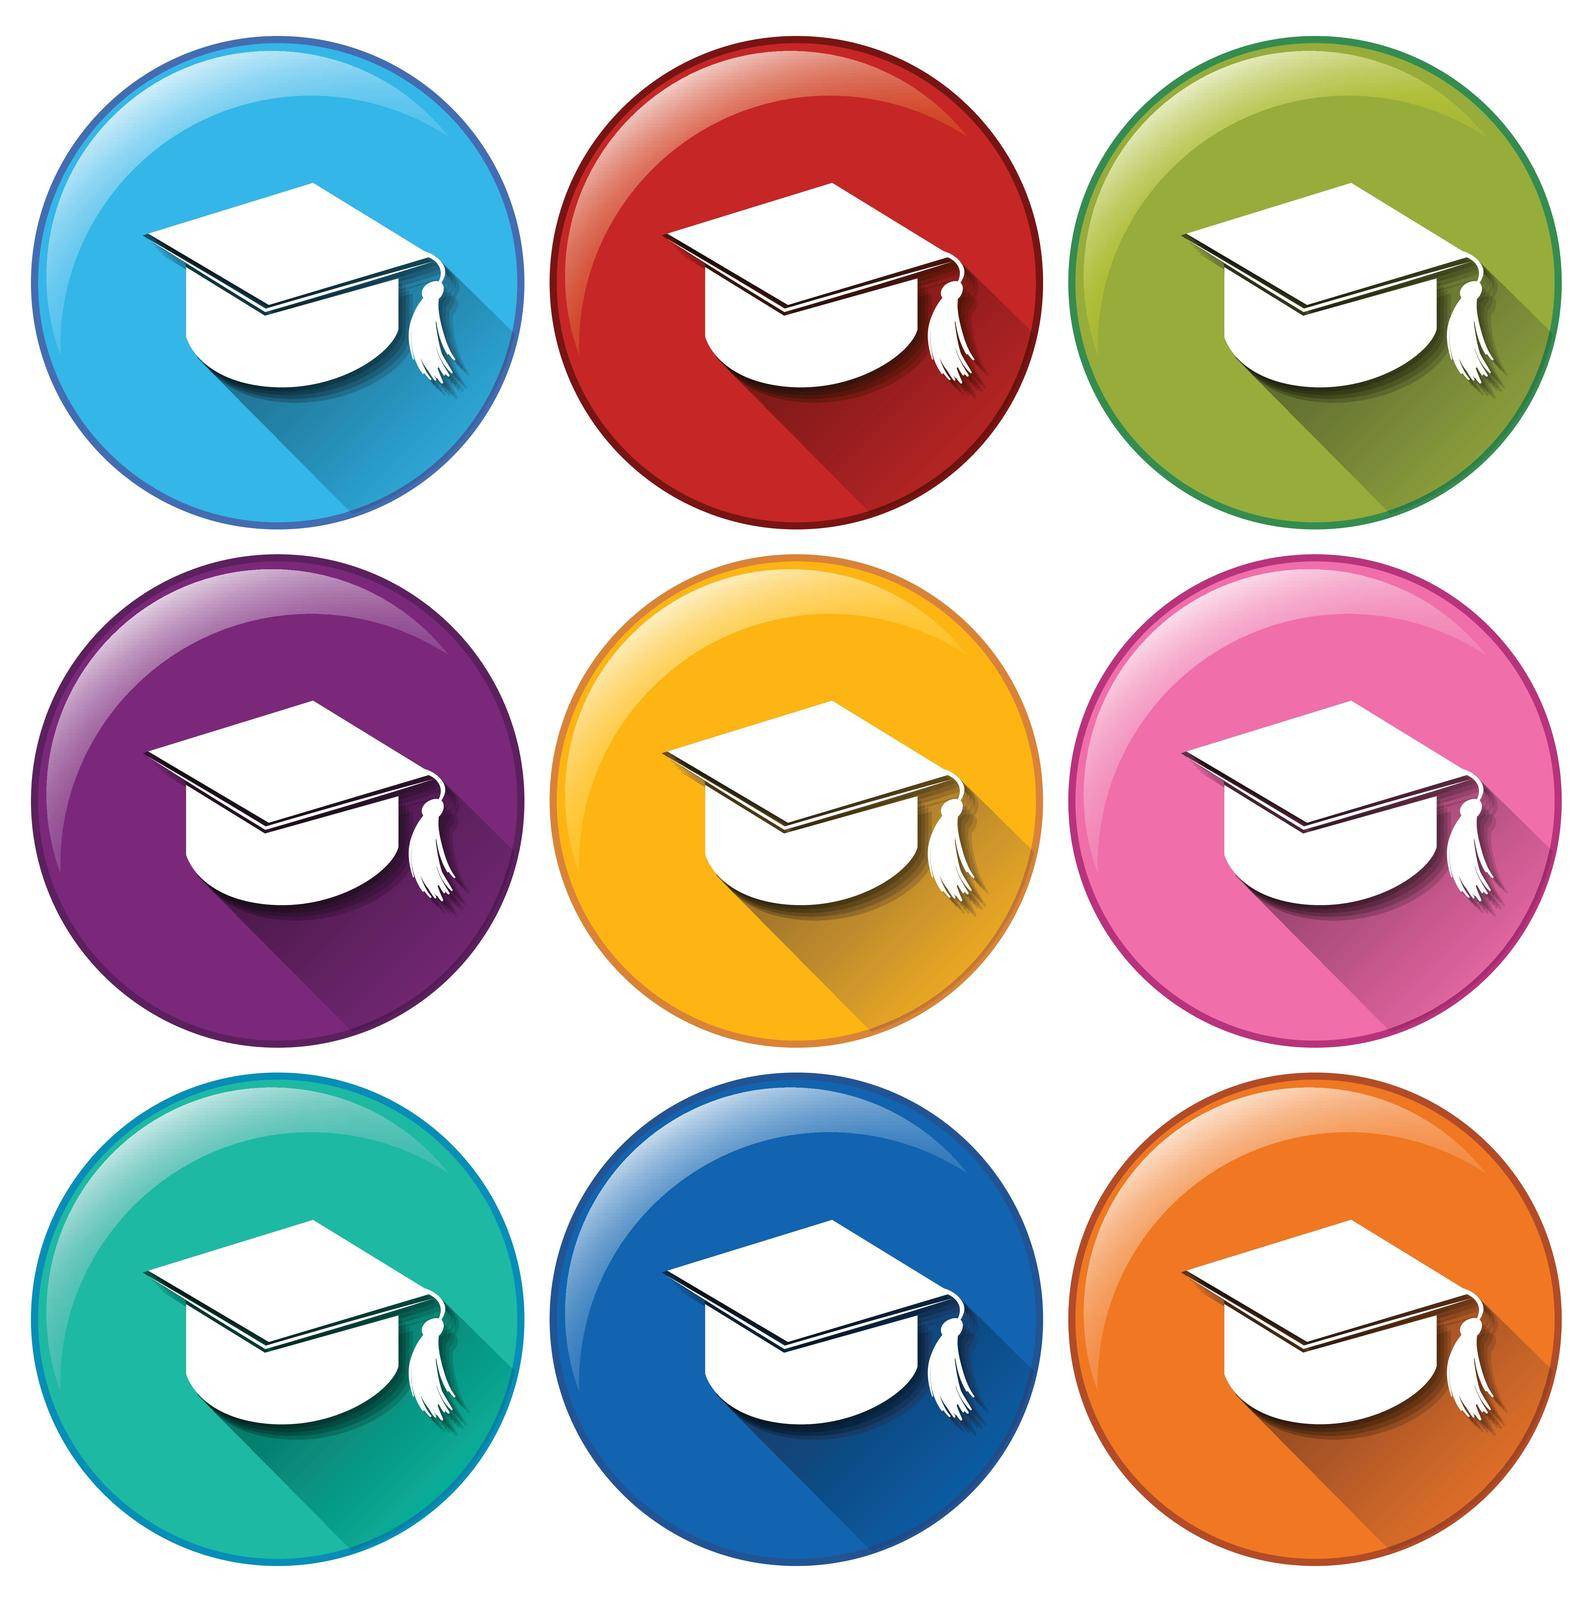 Graduation cap icons by iimages